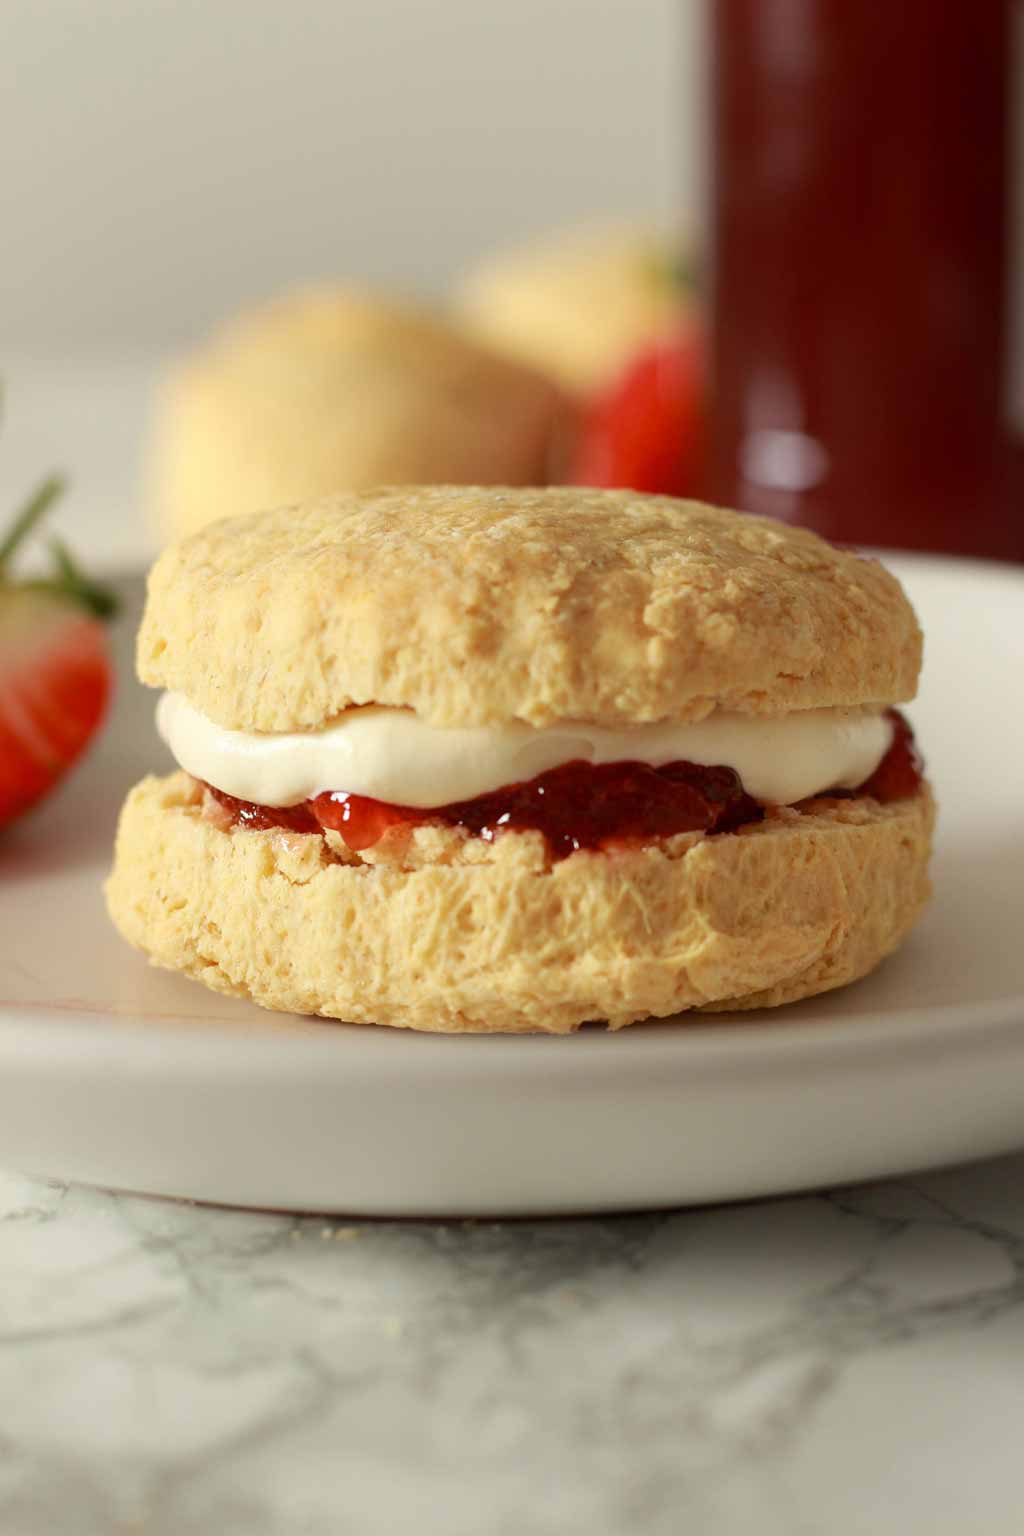 Scone Filled With Jam And Cream